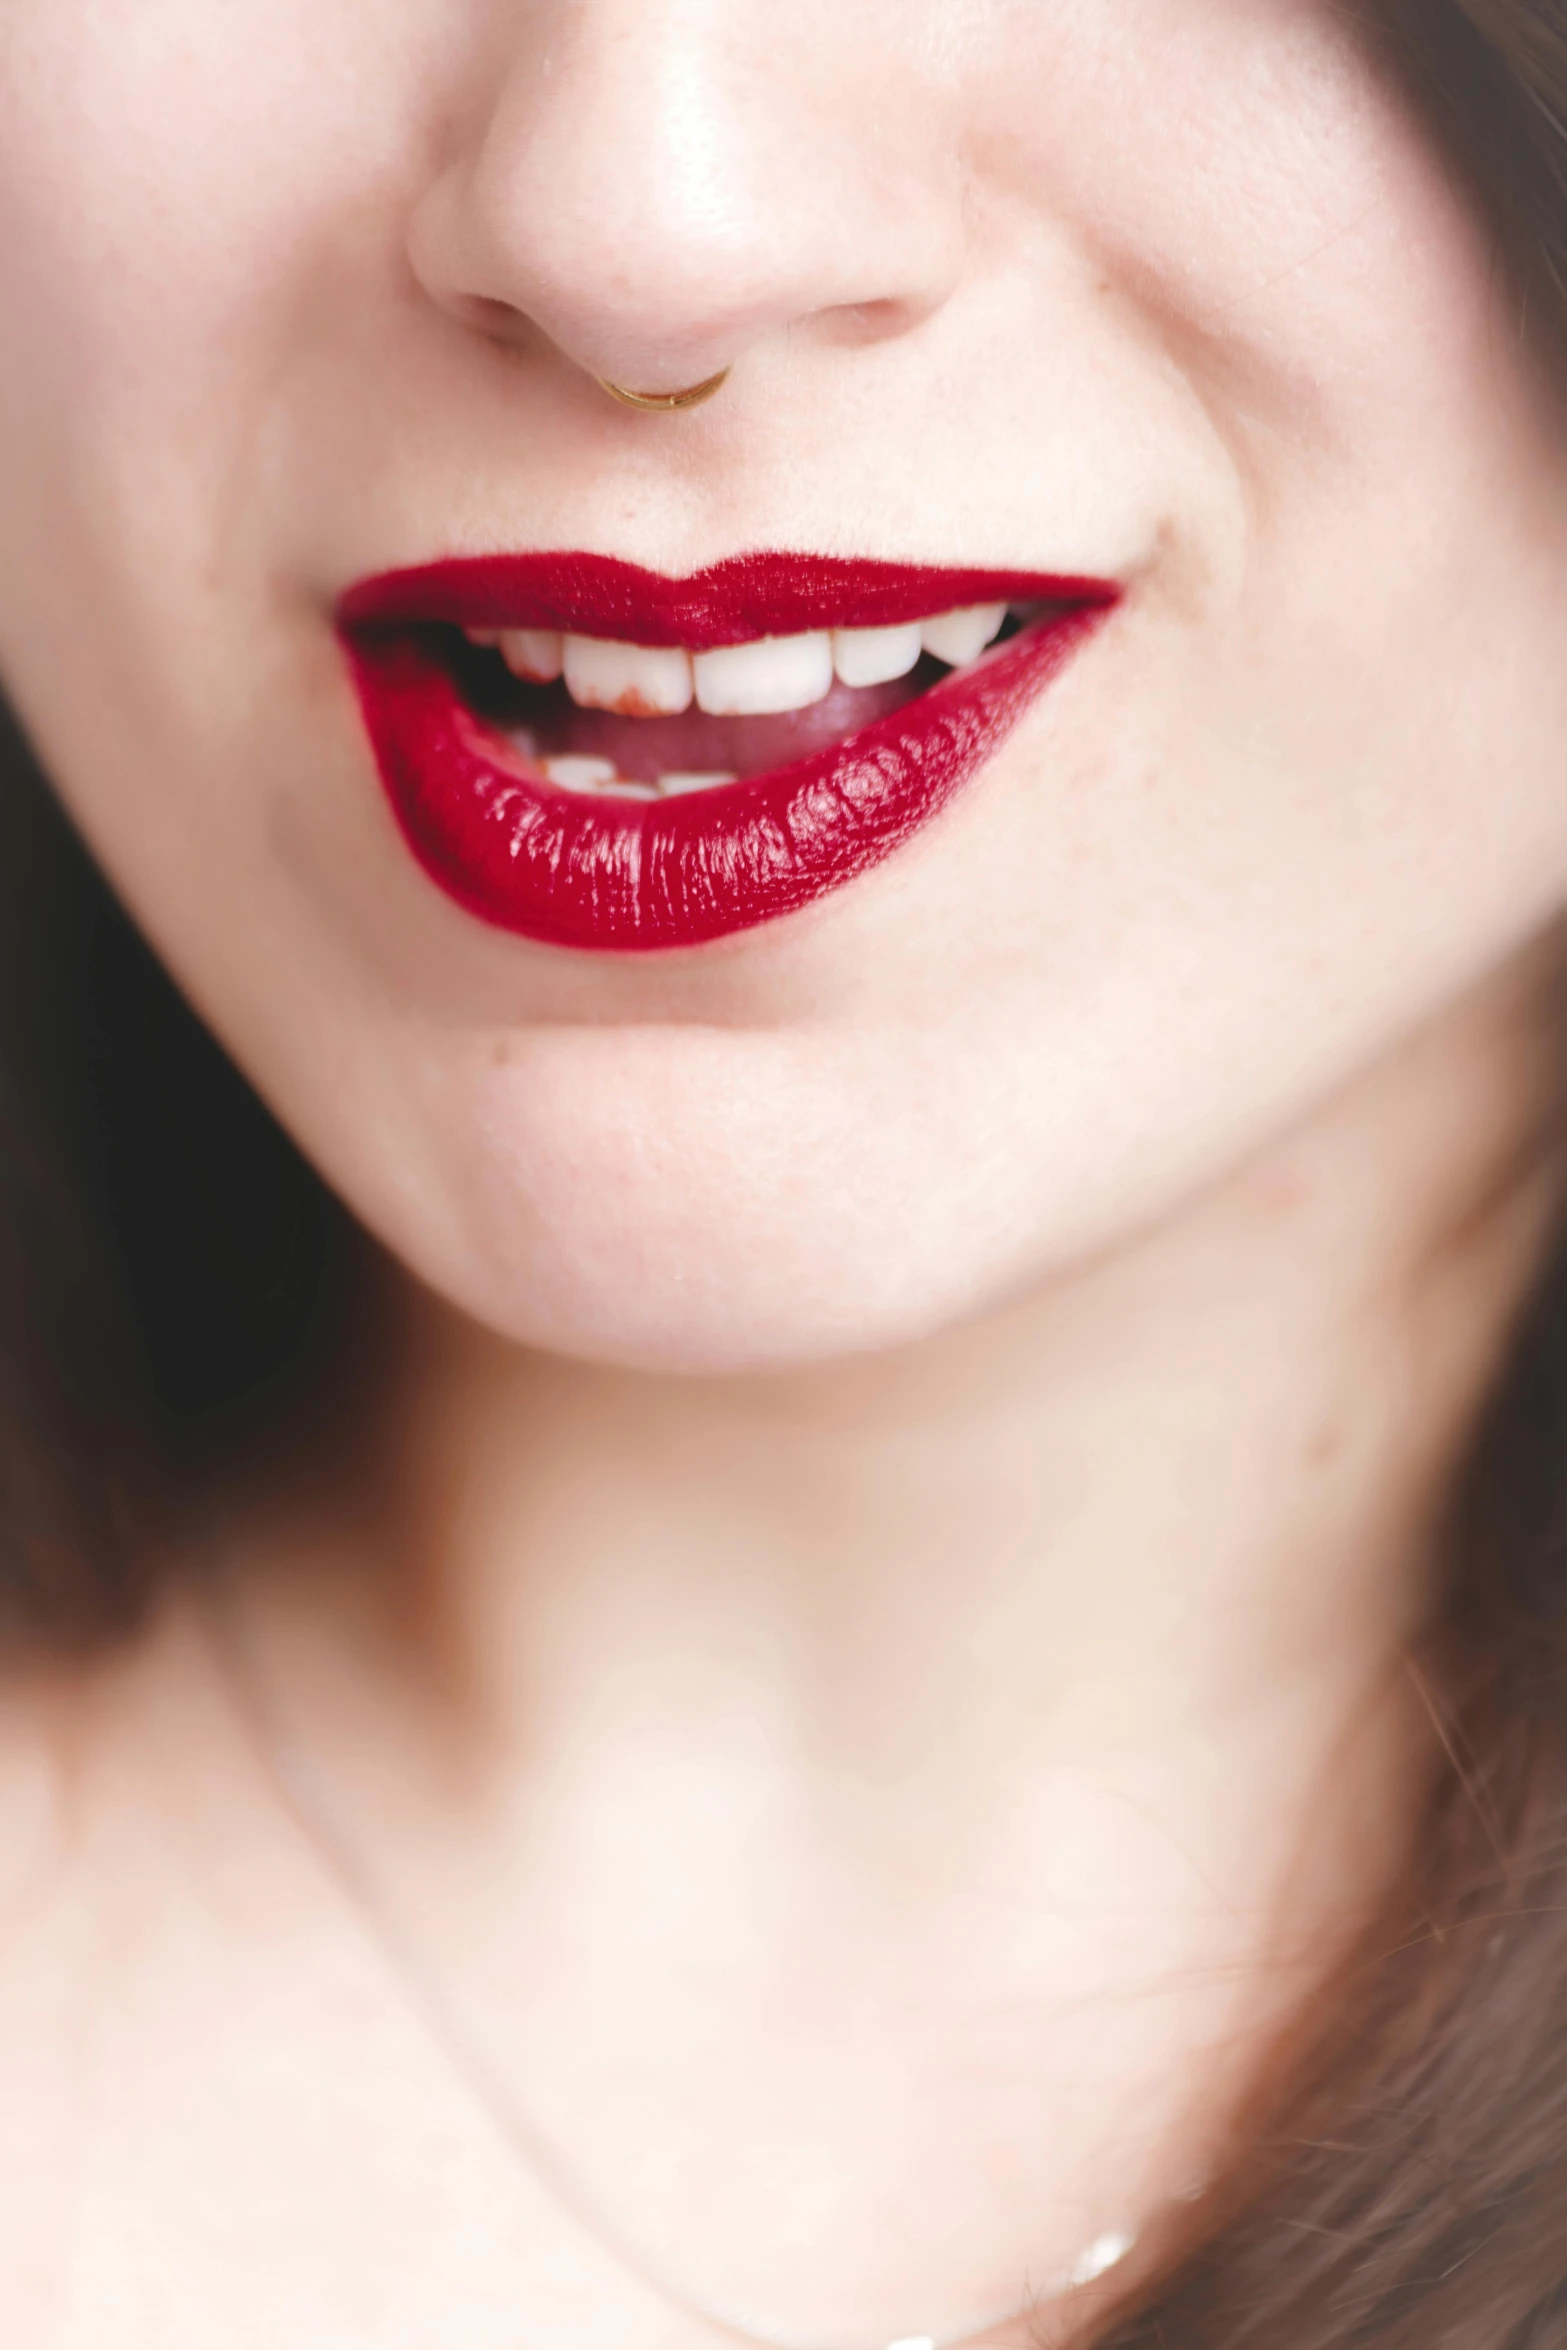 a close up of a woman with red lipstick, by Julia Pishtar, trending on pexels, renaissance, half onesided smile, mouth half open, red velvet, porcelain skin ”